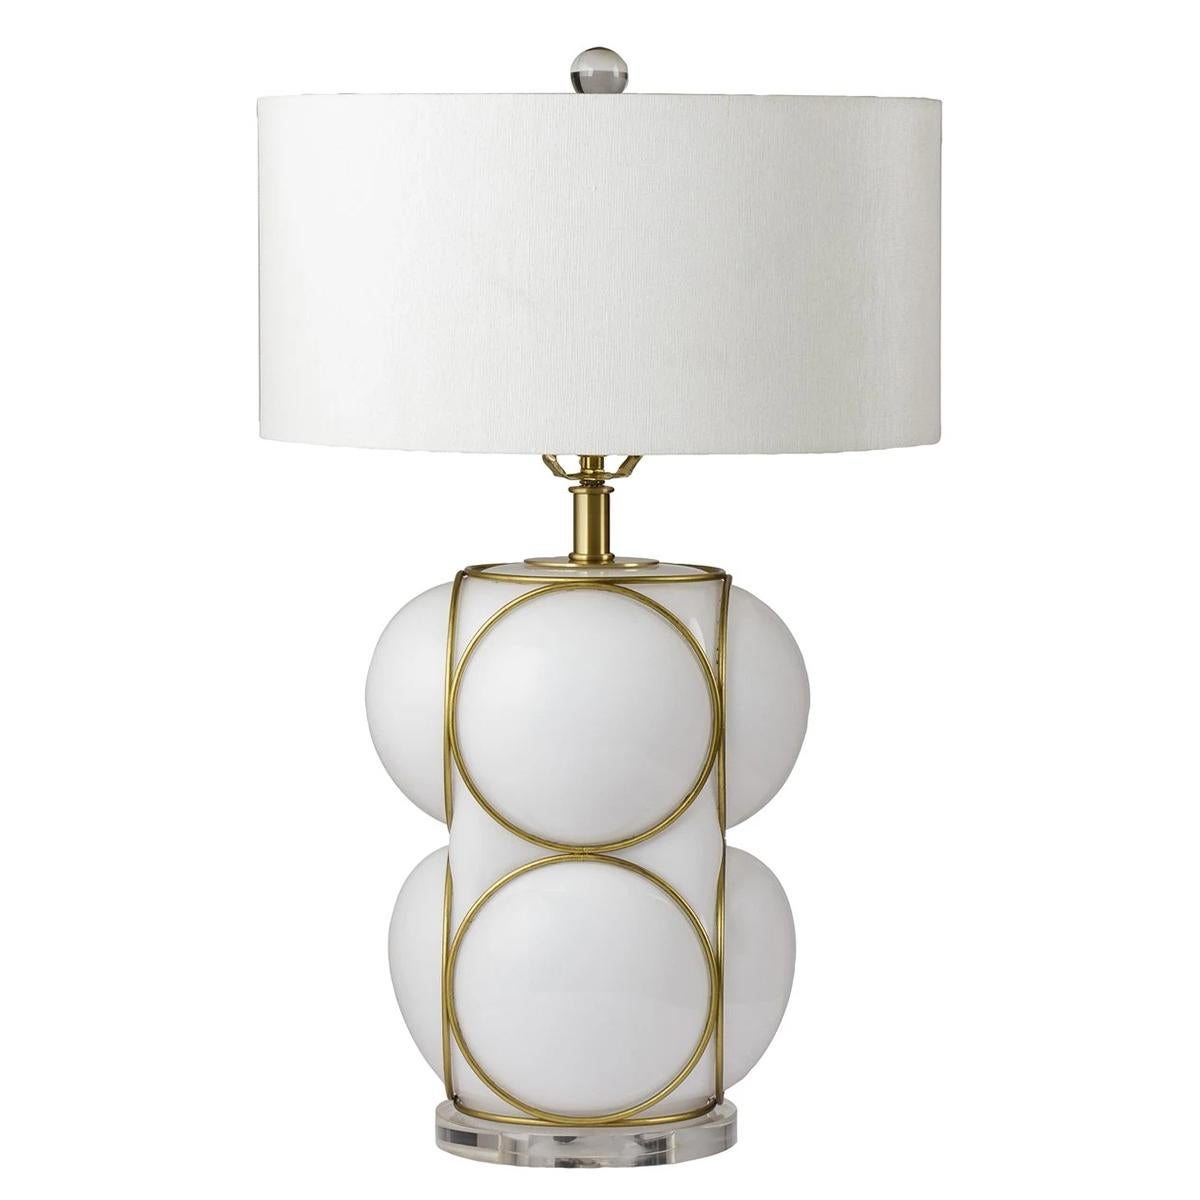 Table lamp Walberg White with white glass base with
brass trims. On plexiglass round base. 1 bulb, lamp
holder type E27, max 40 watt. 220 Volt. Bulb not included.
Including a white coton shade.